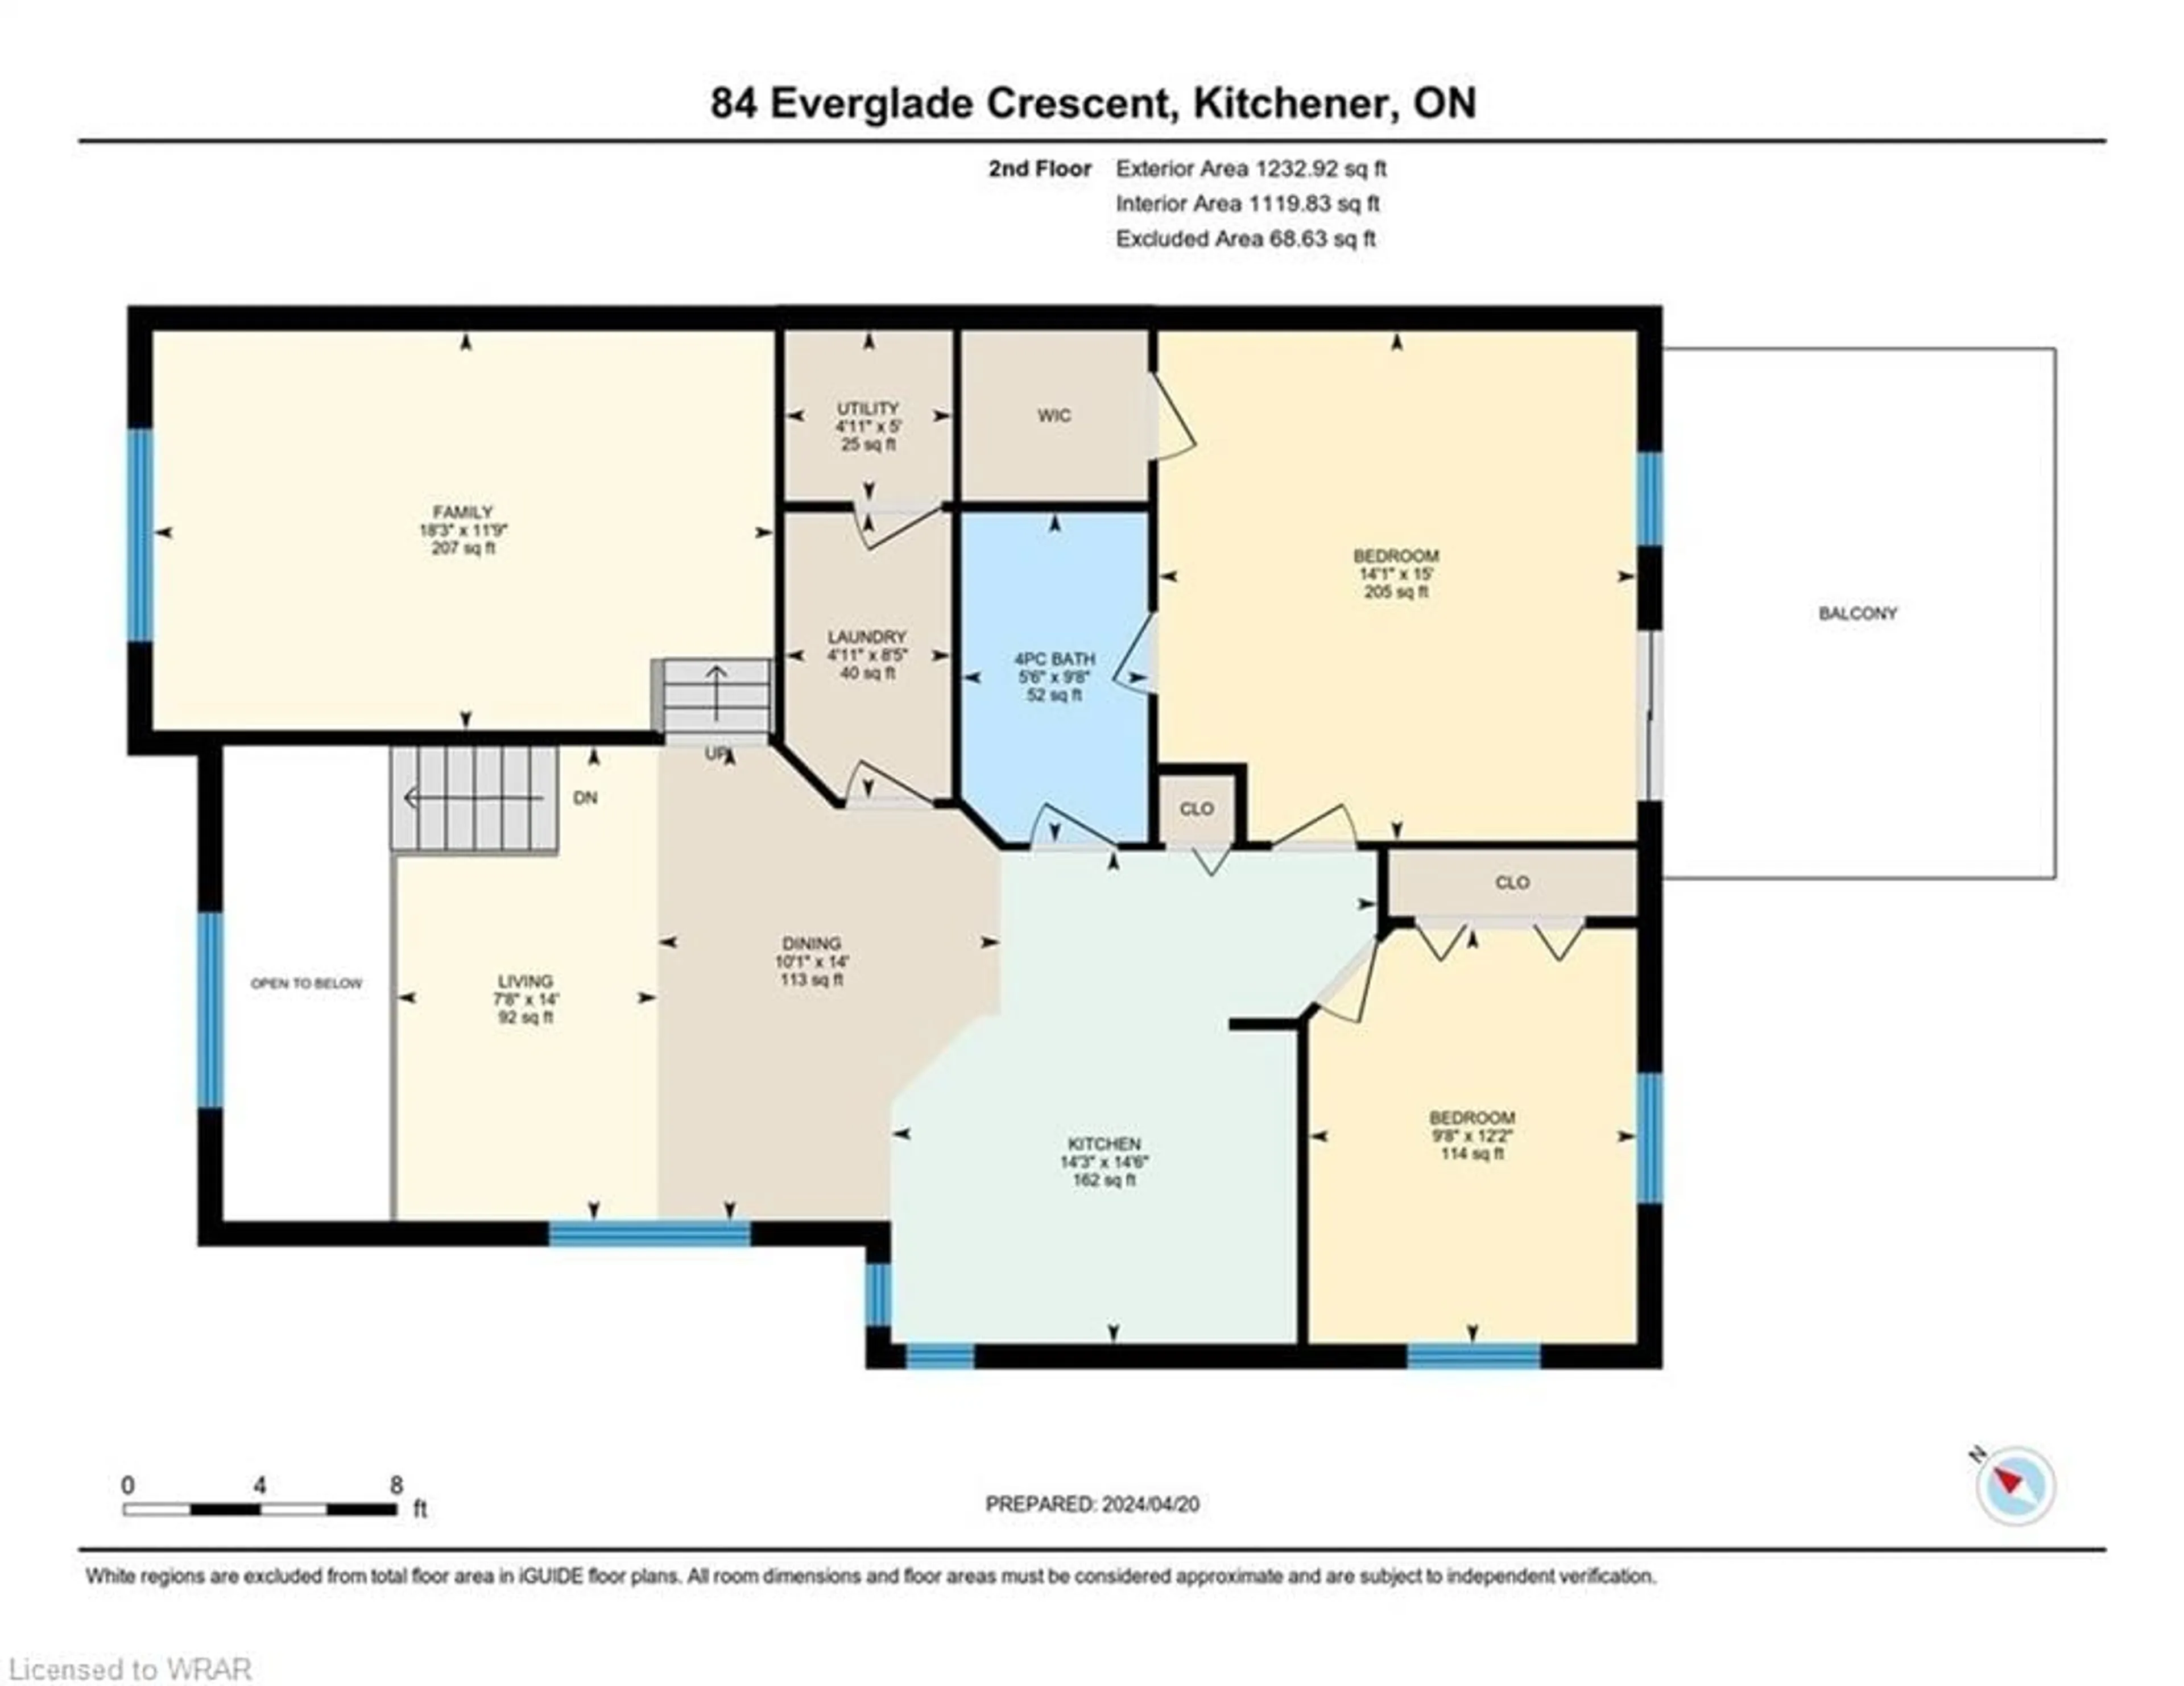 Floor plan for 84 Everglade Cres, Kitchener Ontario N2E 3Y5